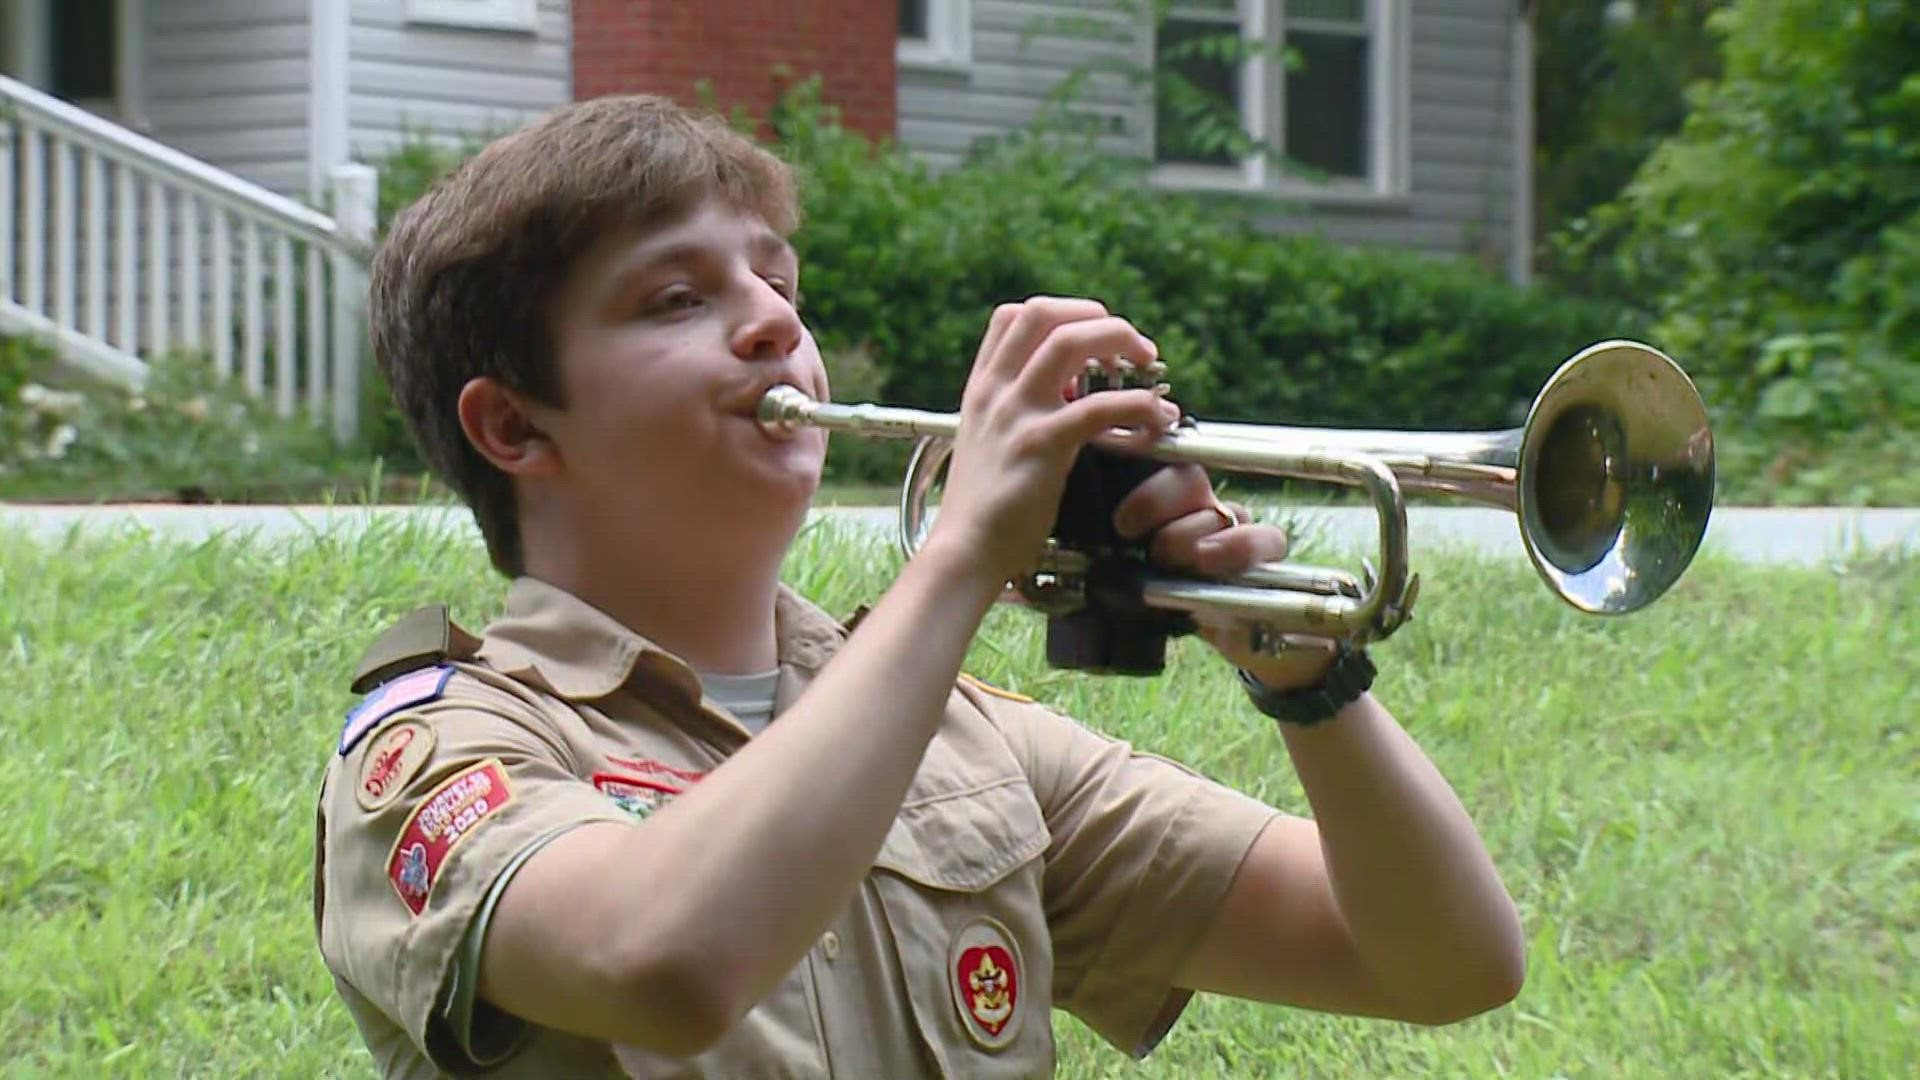 The Scouts honor fallen military members through 'Taps Across America'.